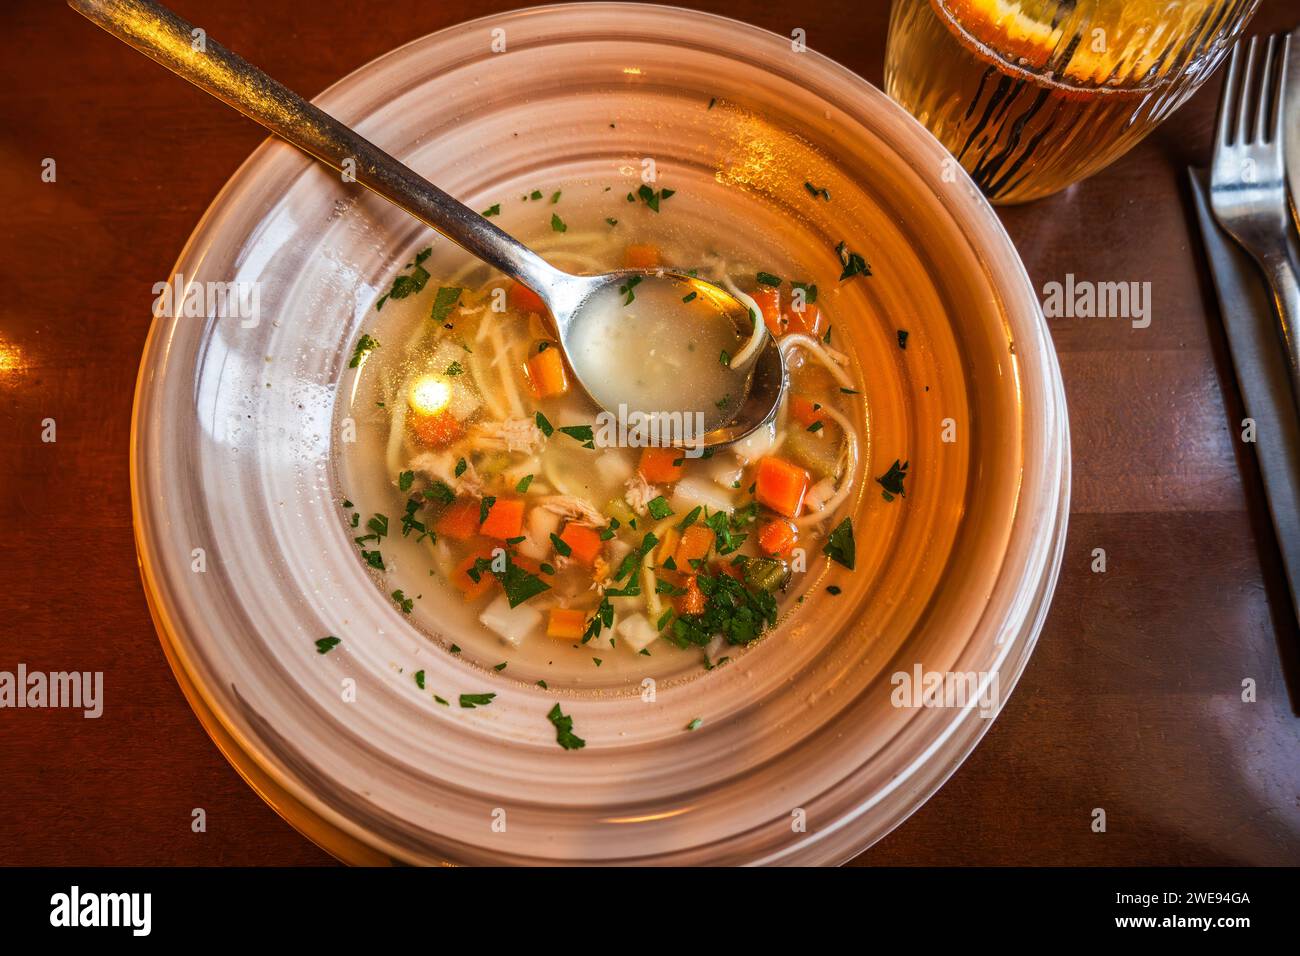 Portion of beef broth with sliced vegetable and noodle in plate, spoon, drink on table, closeup. Stock Photo